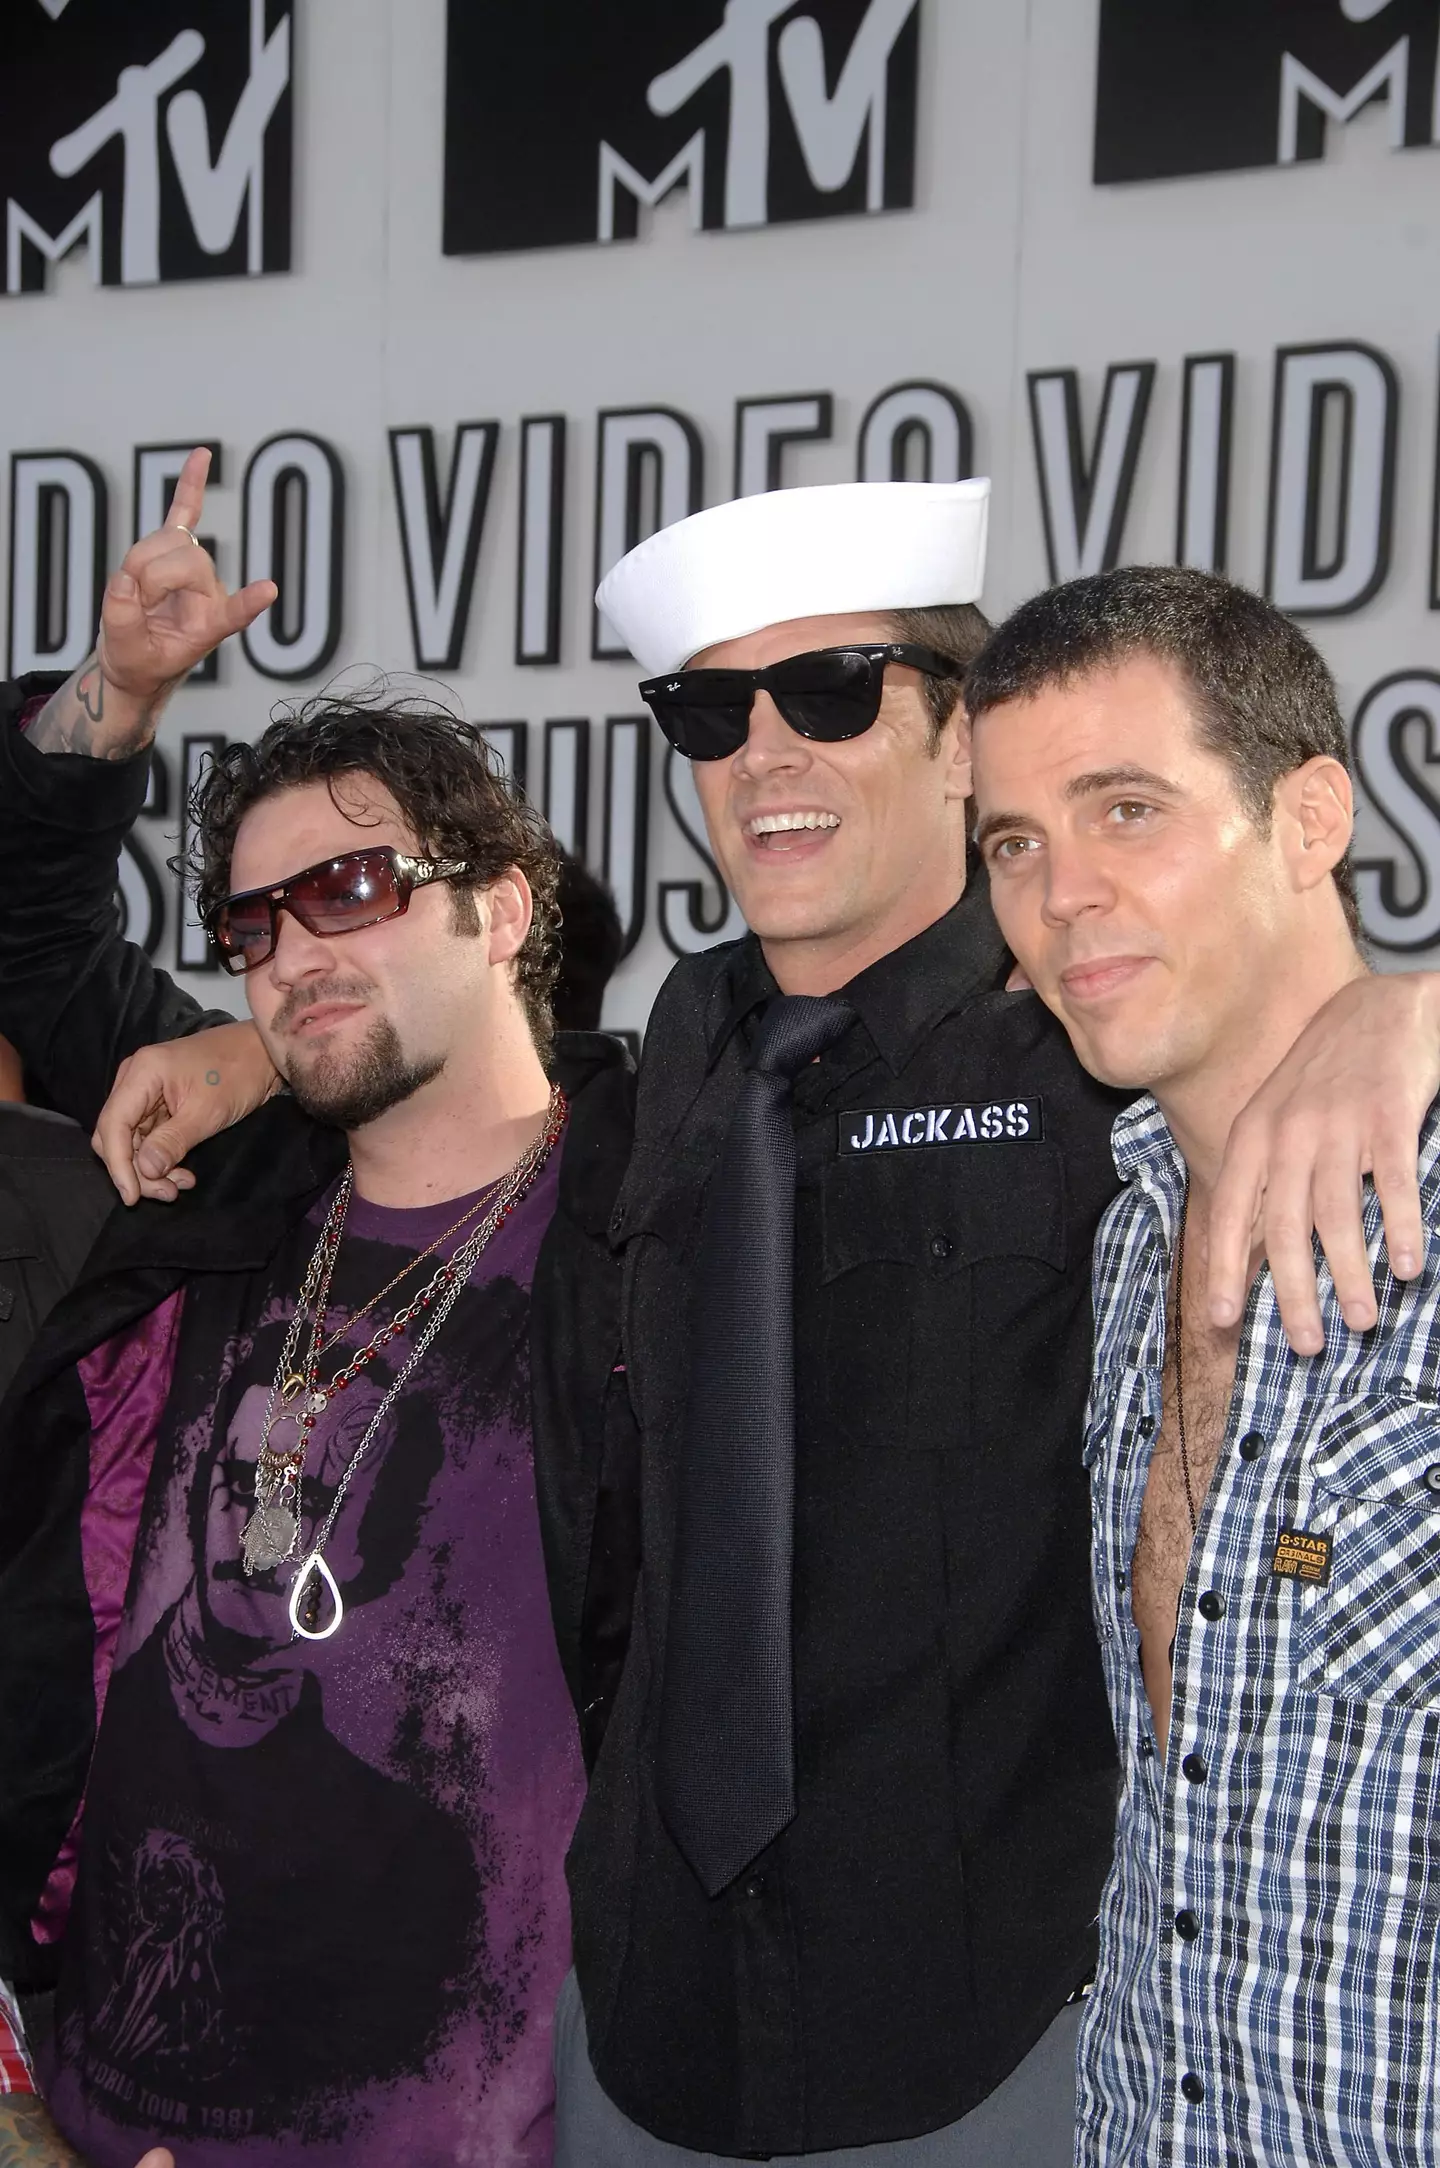 Bam Margera and Johnny Knoxville have clashed before.